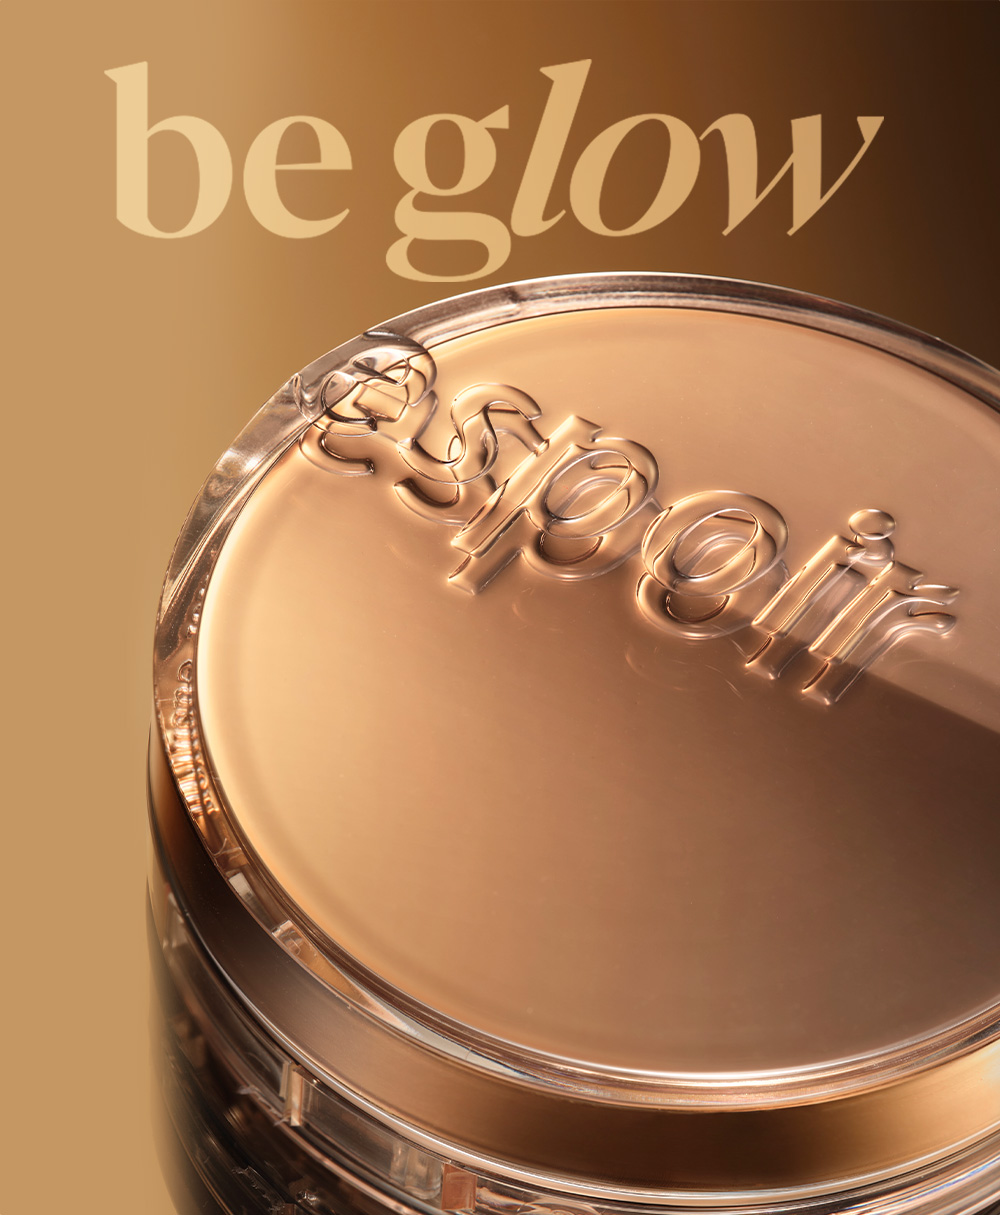 Protailor be glow Cushion New class